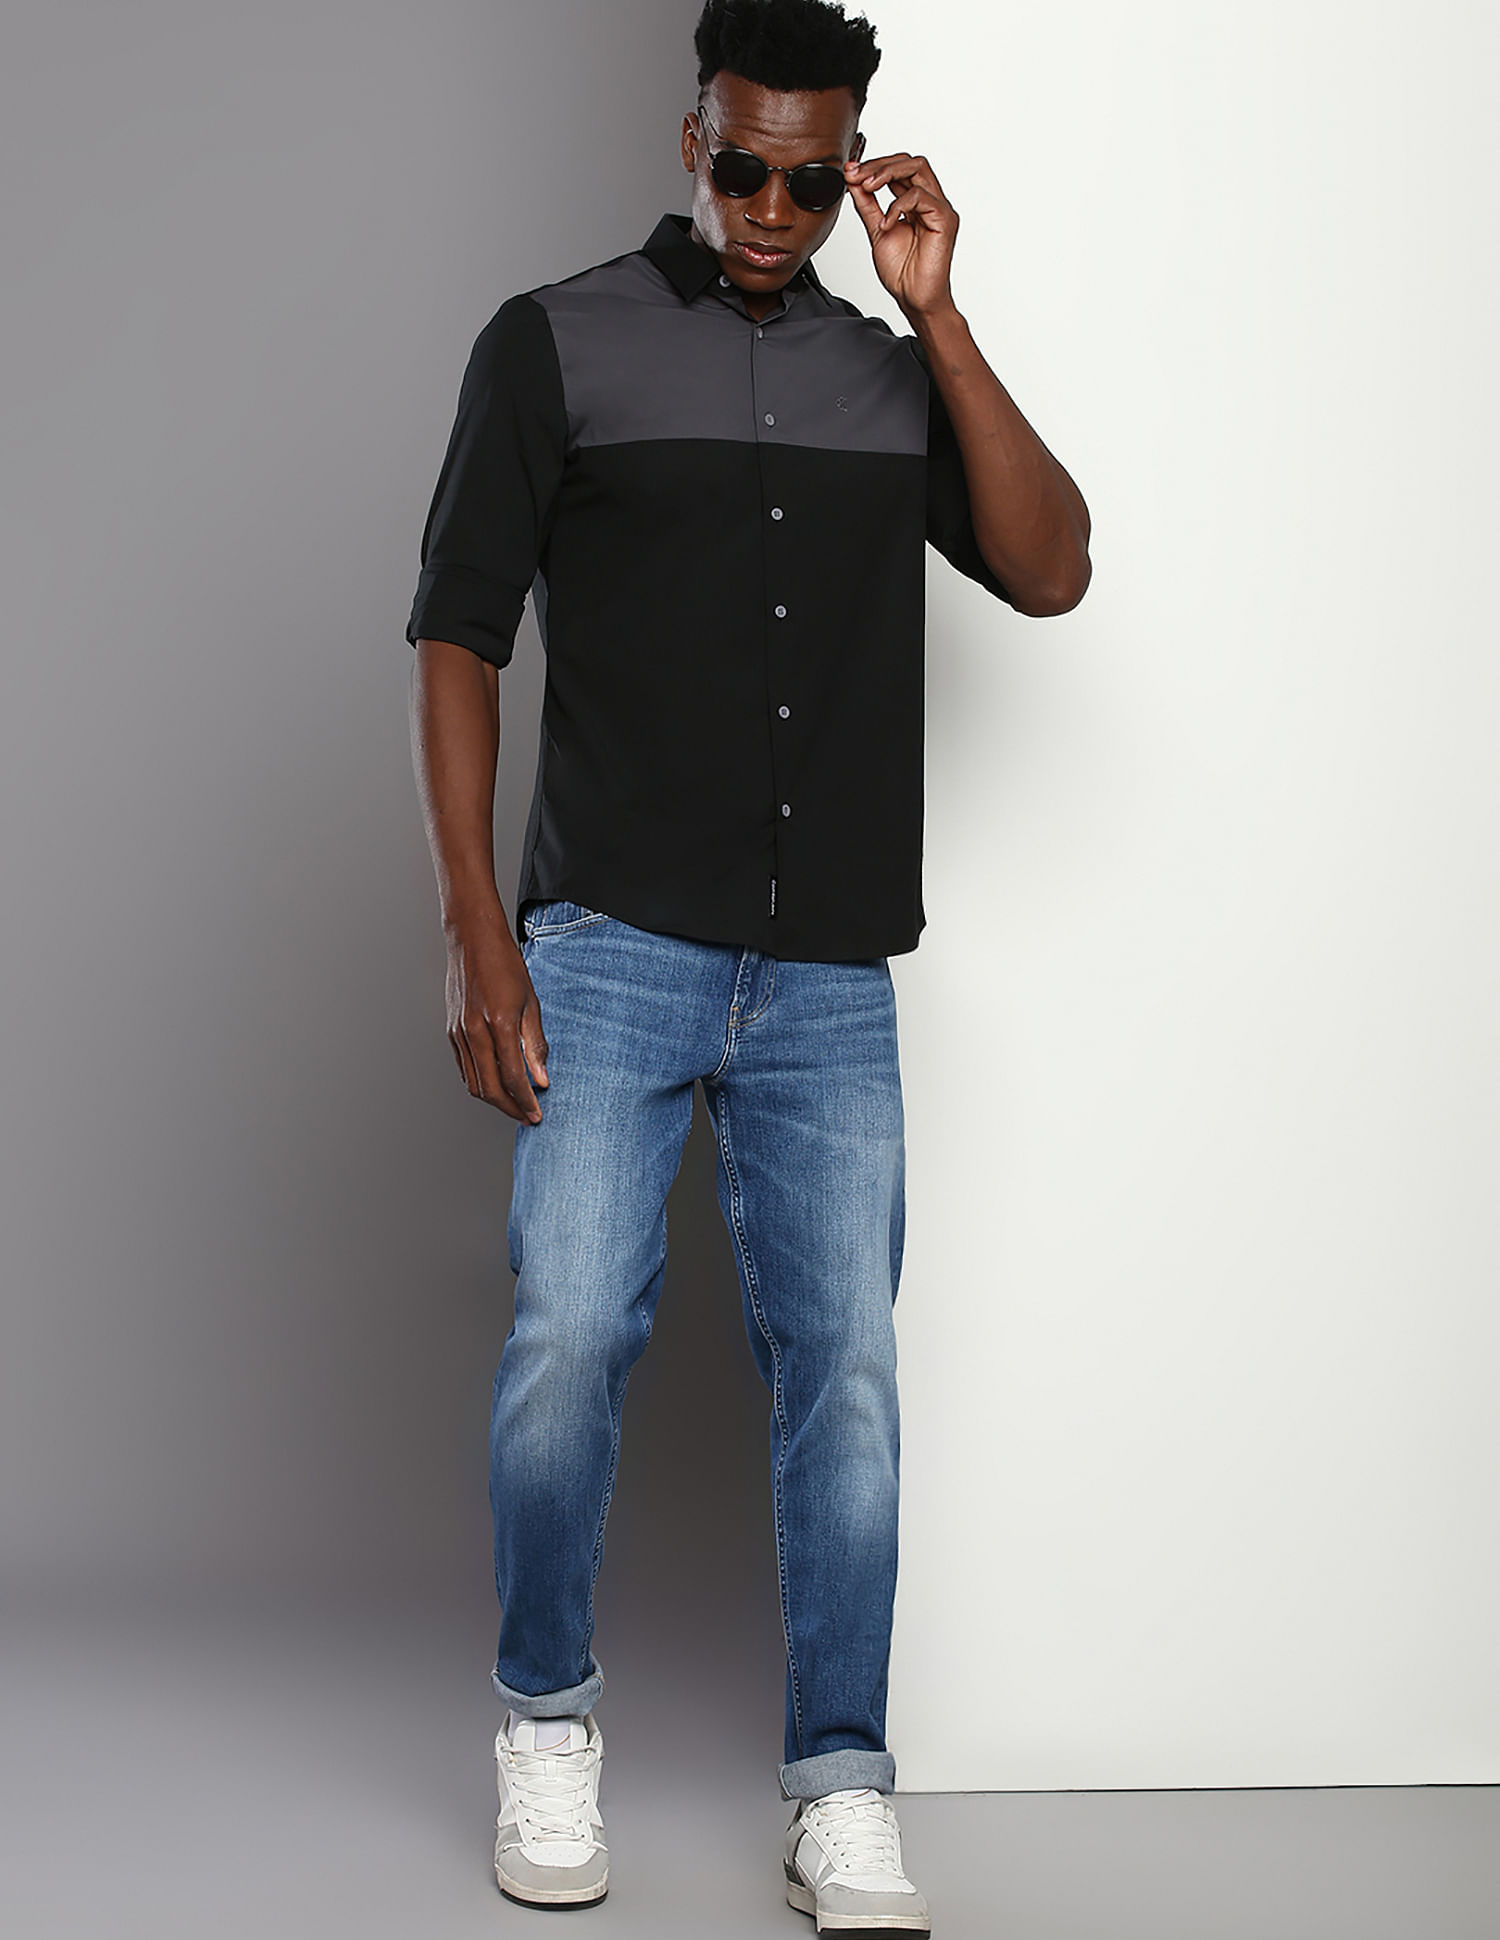 Buy Pepe Jeans Black Linen Semi Fit Casual Shirt - Shirts for Men 877447 |  Myntra